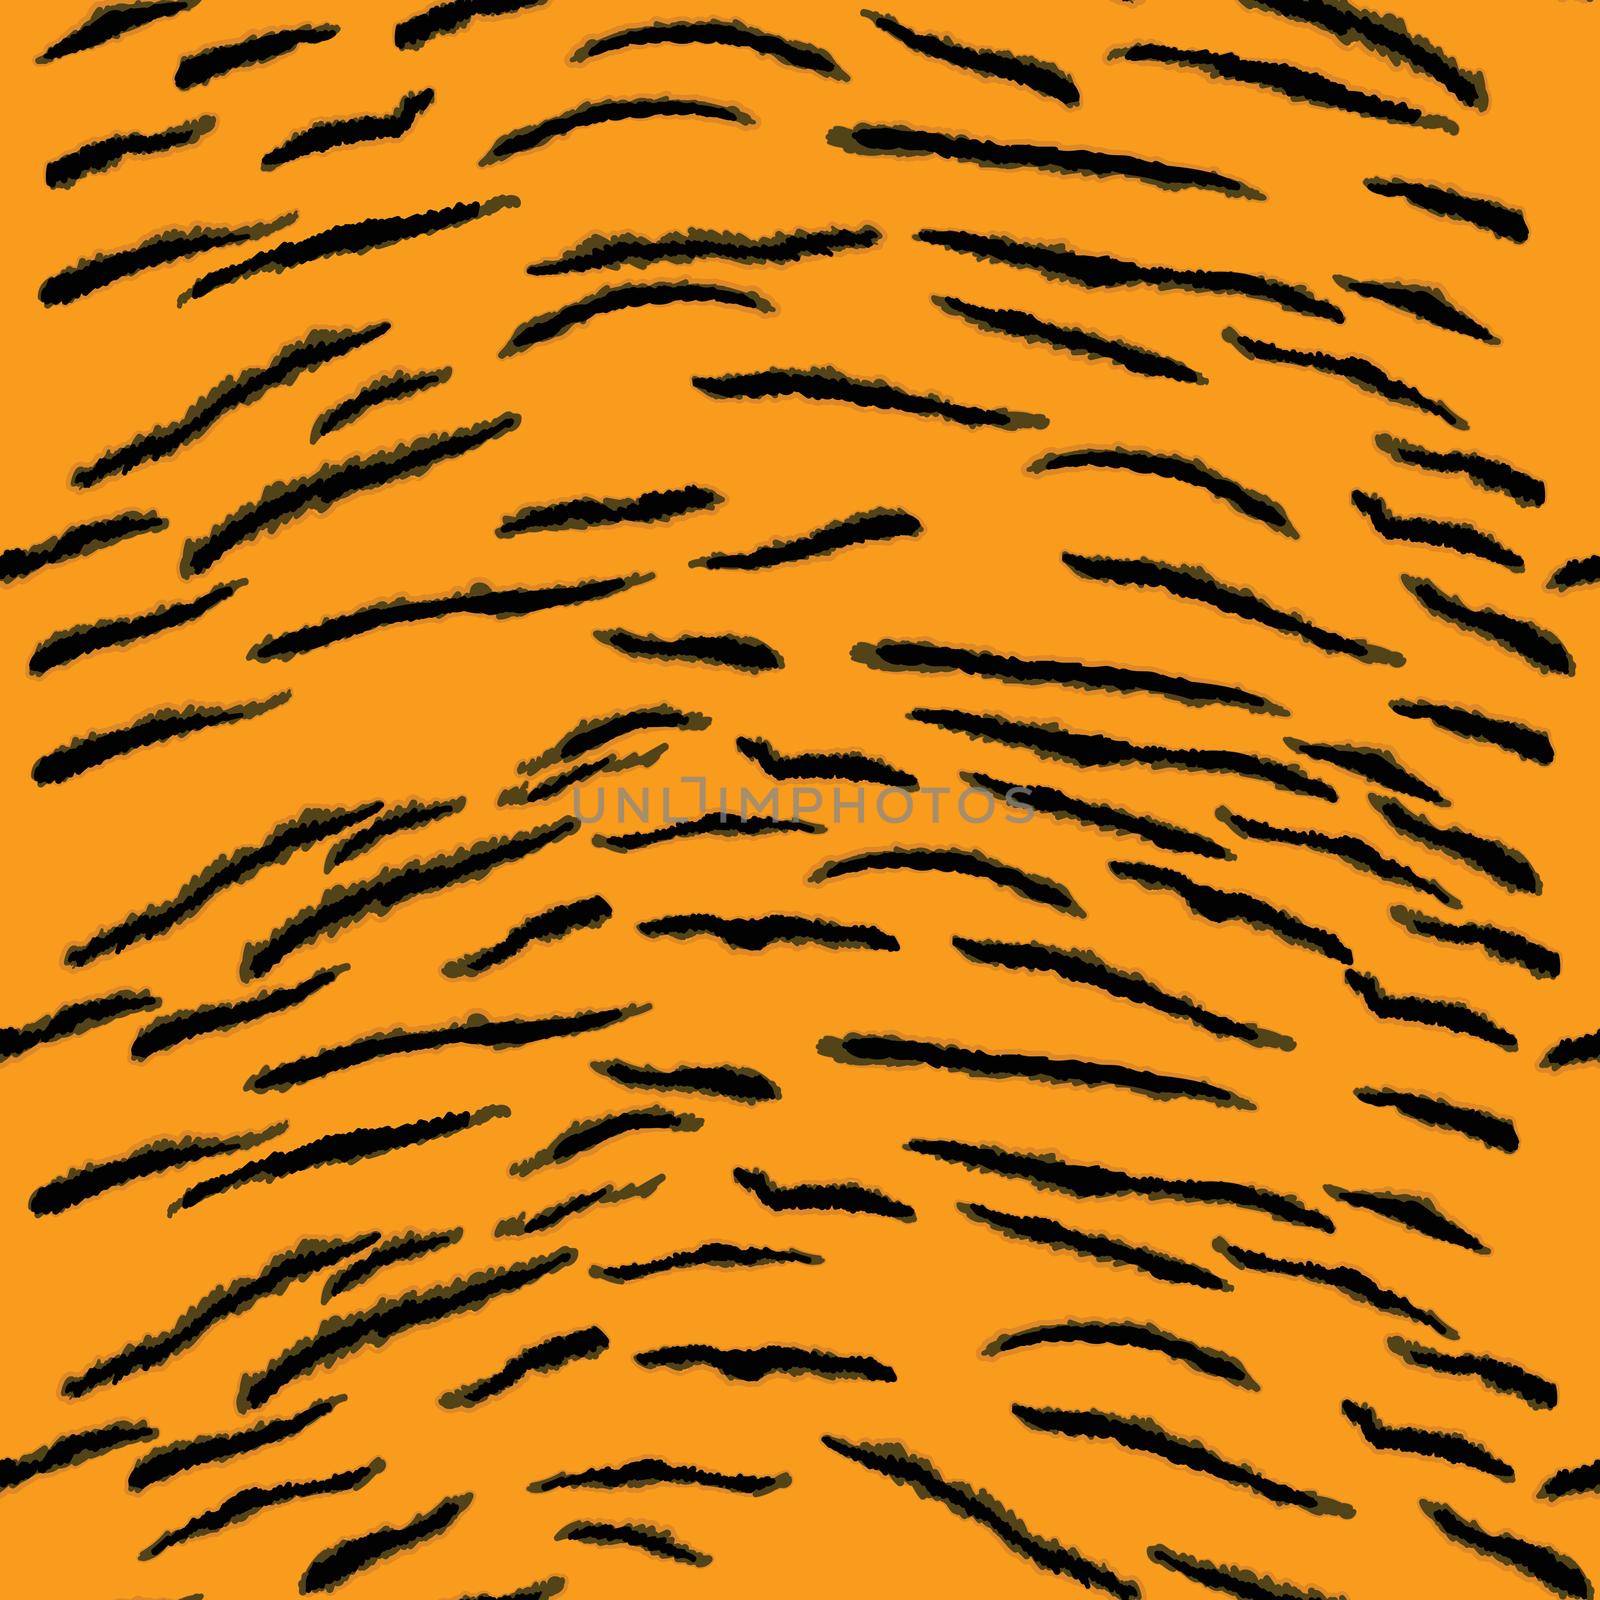 Abstract modern tiger seamless pattern. Animals trendy background. Orange and black decorative vector stock illustration for print, card, postcard, fabric, textile. Modern ornament of stylized skin by allaku